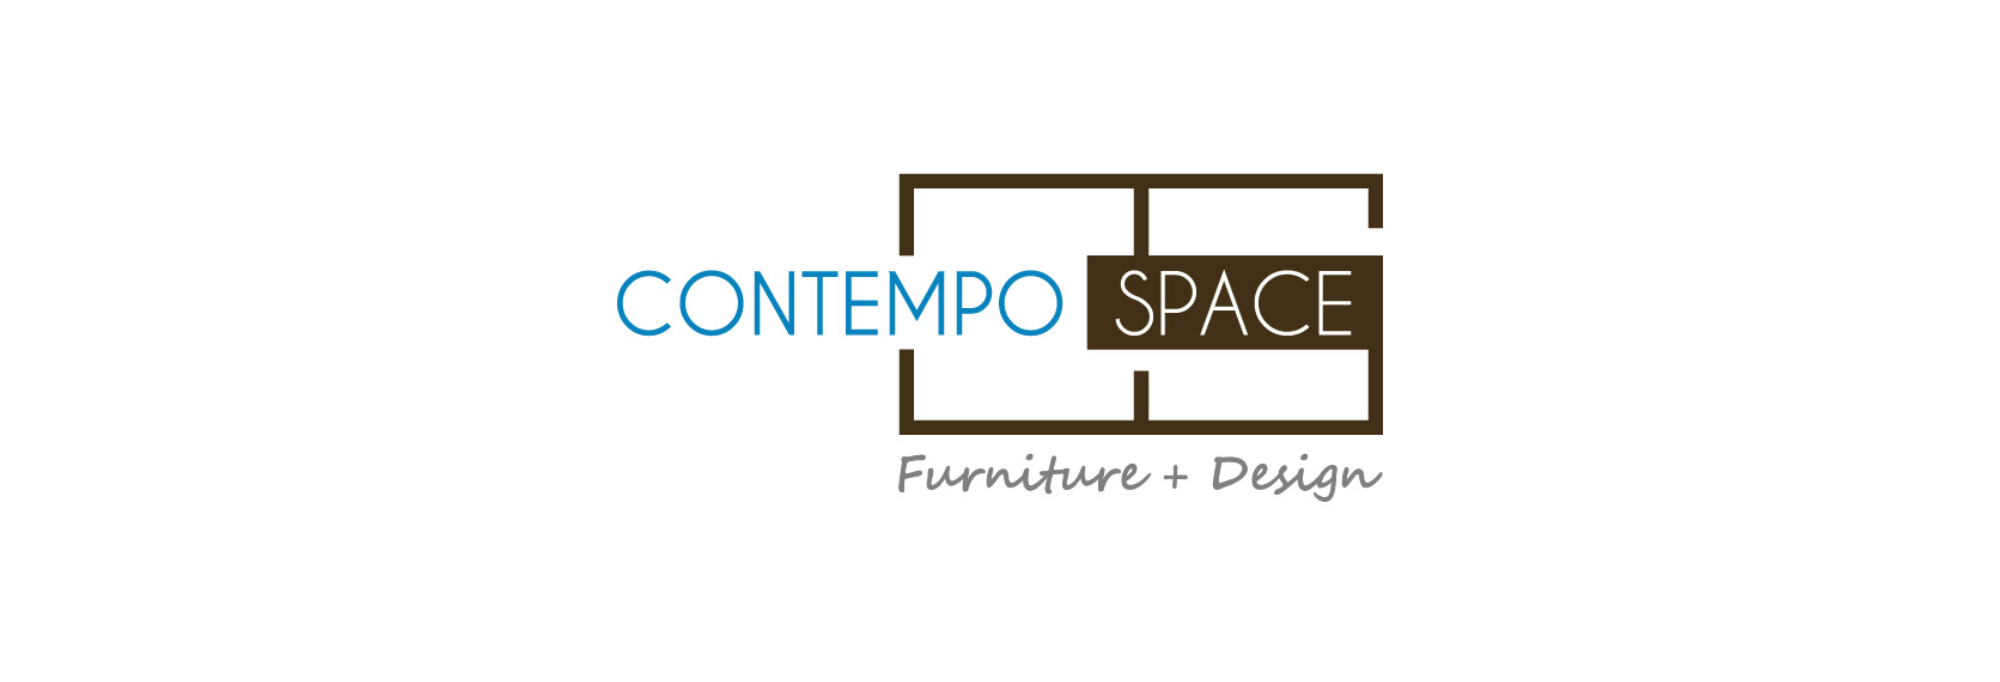 Contempo Space.png